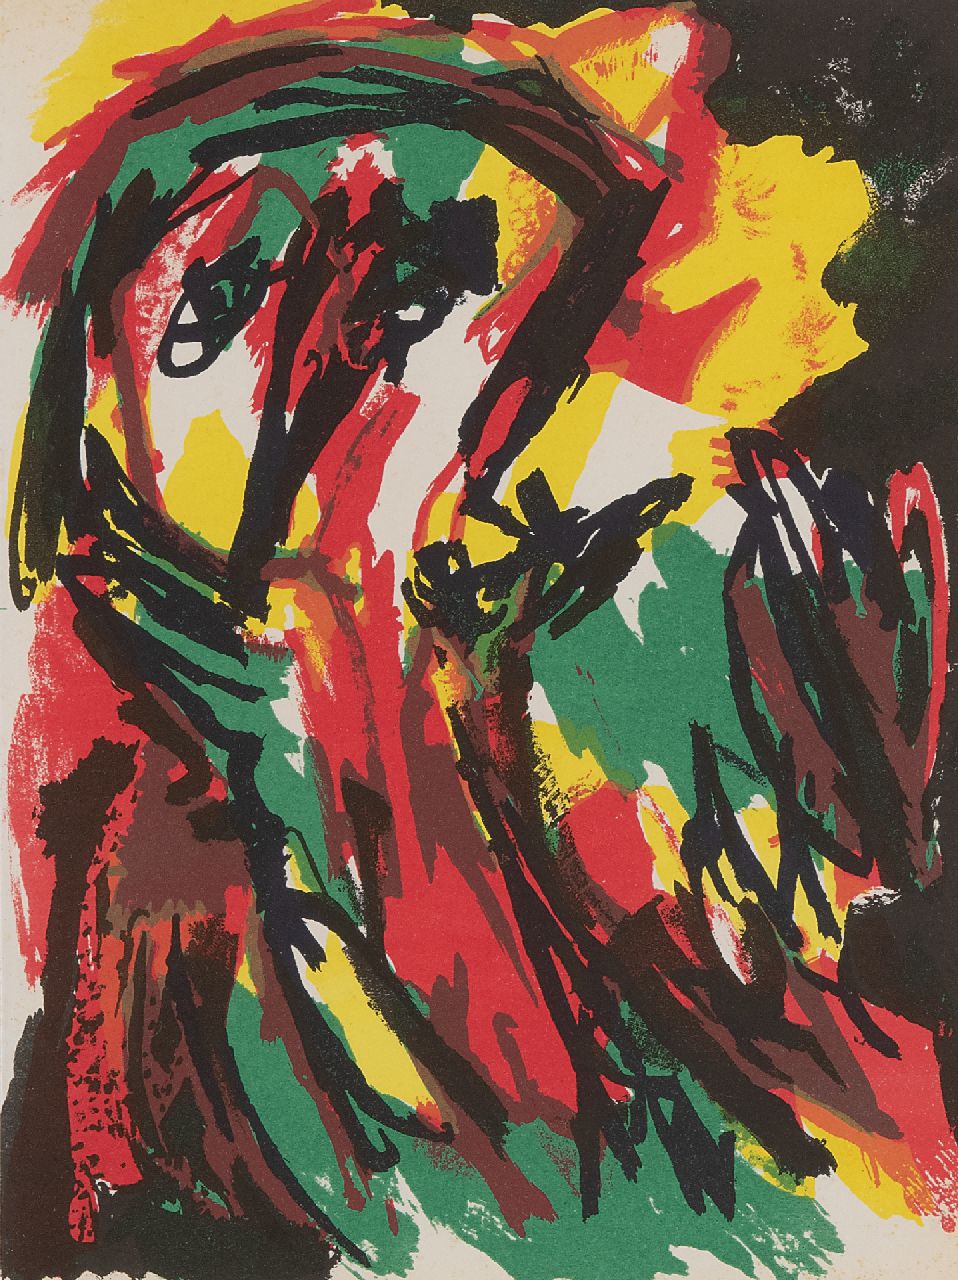 Appel C.K.  | Christiaan 'Karel' Appel | Prints and Multiples offered for sale | Abstract person, lithograph 30.9 x 23.9 cm, executed ca. 1961